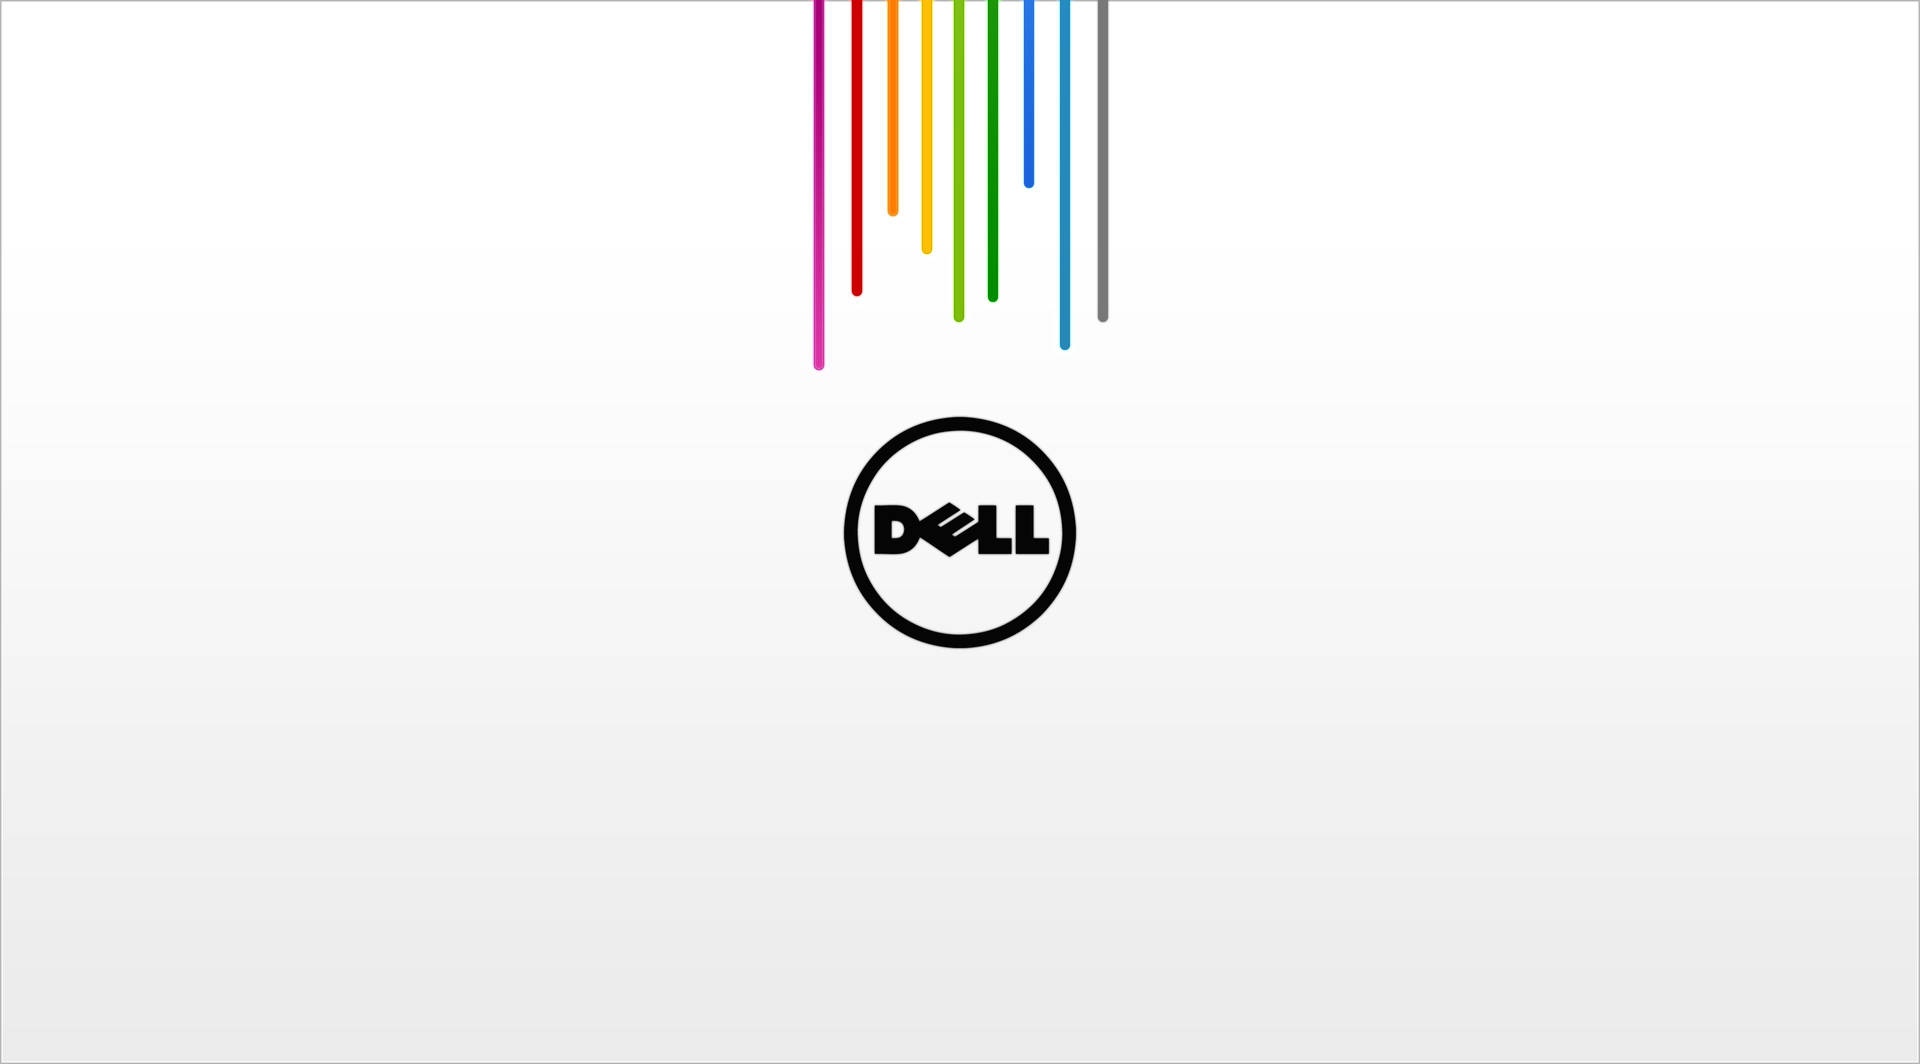 Dell Logo And Rainbow Background